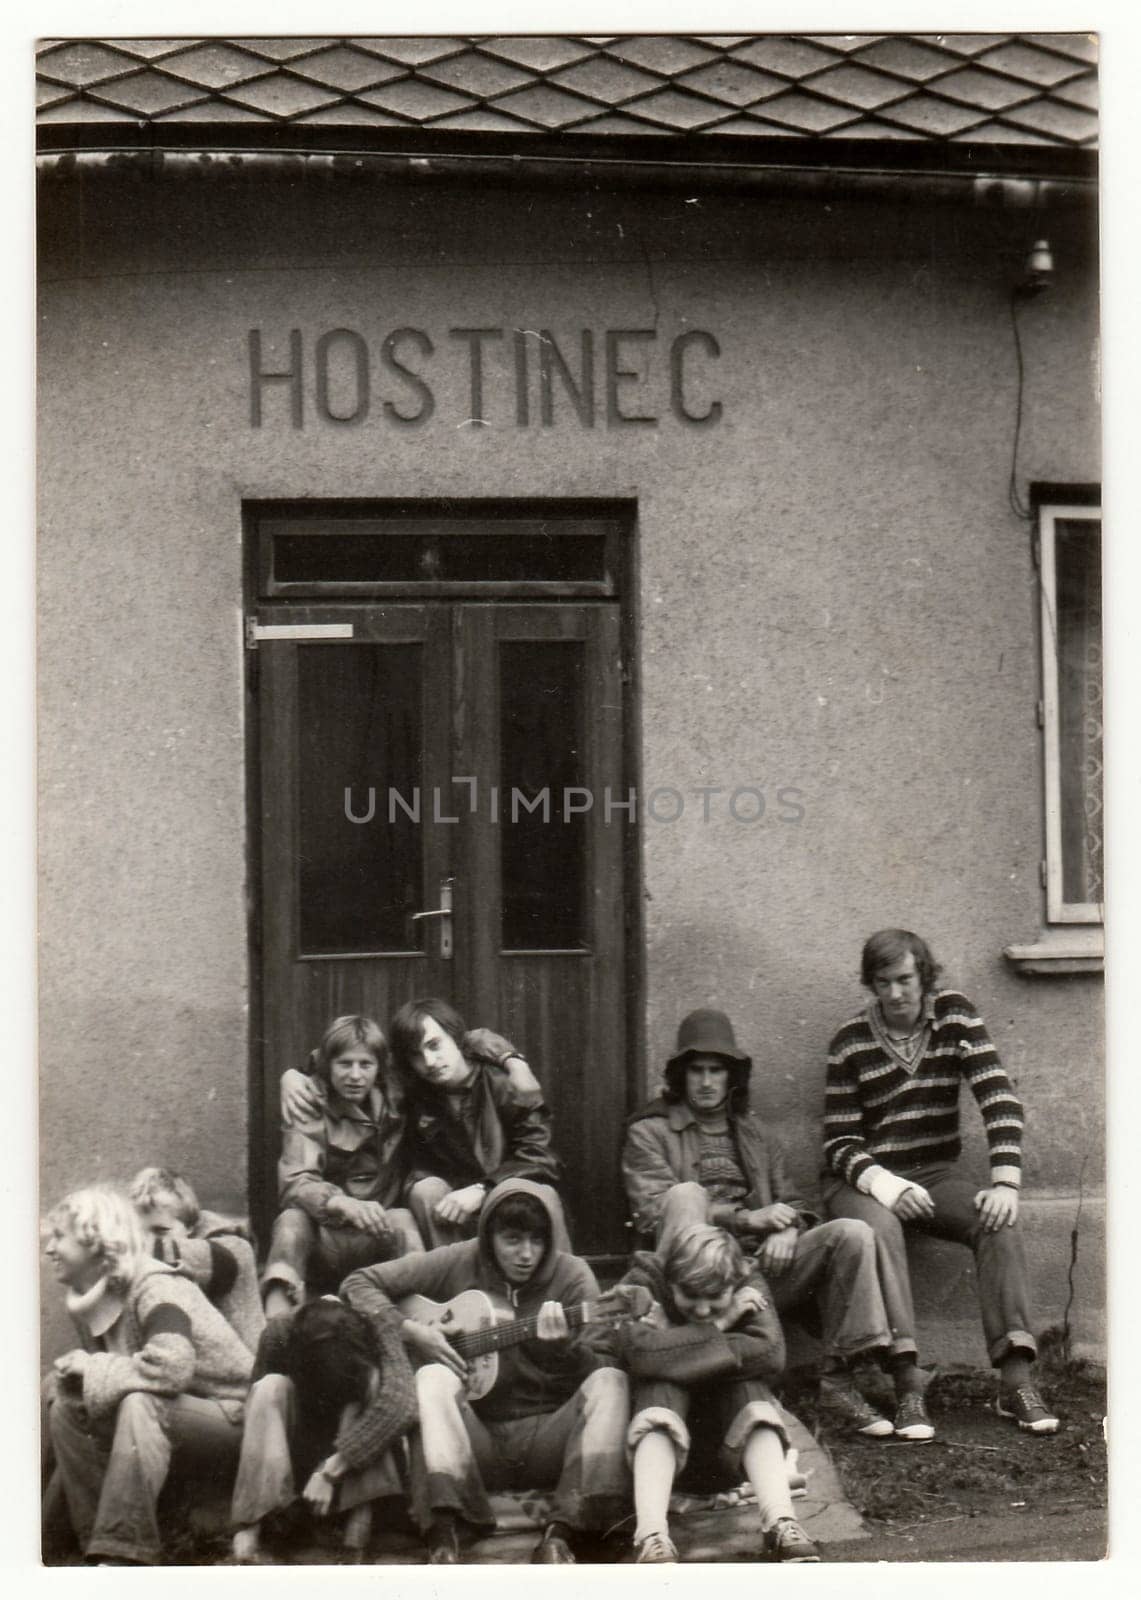 THE CZECHOSLOVAK SOCIALIST REPUBLIC - CIRCA 1980s: Vintage photo shows young hikers in front of the pub. One of them plays the guitar. Antique black white photo.